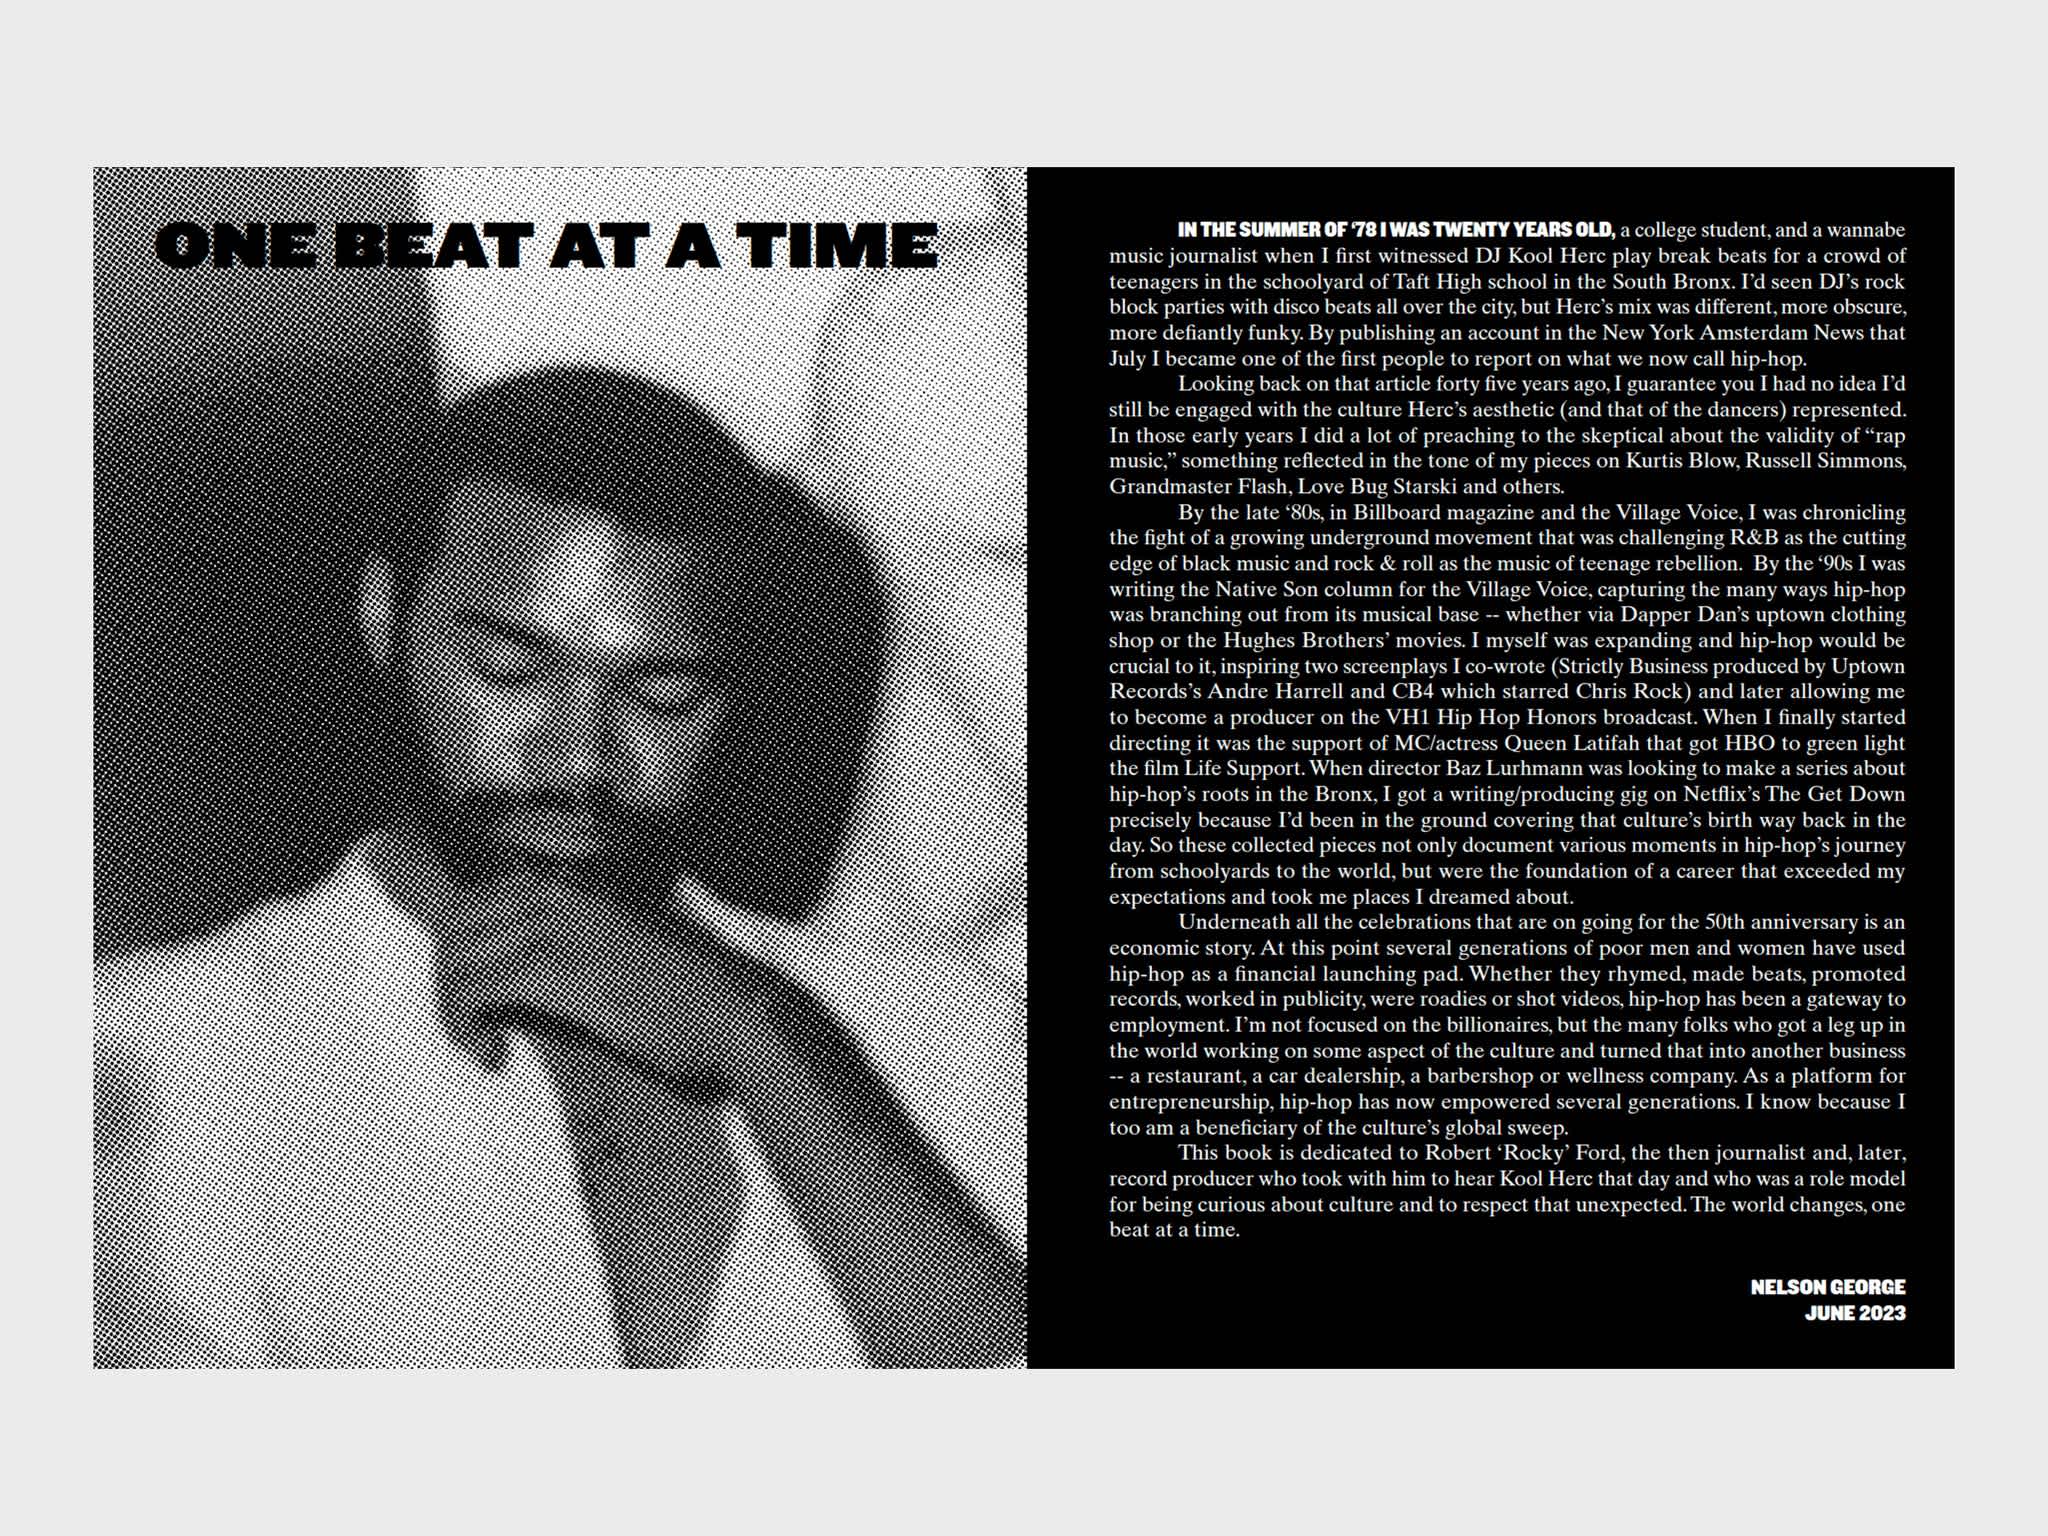 Two page spread. Left is a black and white portrait of the author Nelson George. The right is an essay typed in white text on a black background, it fills the page.